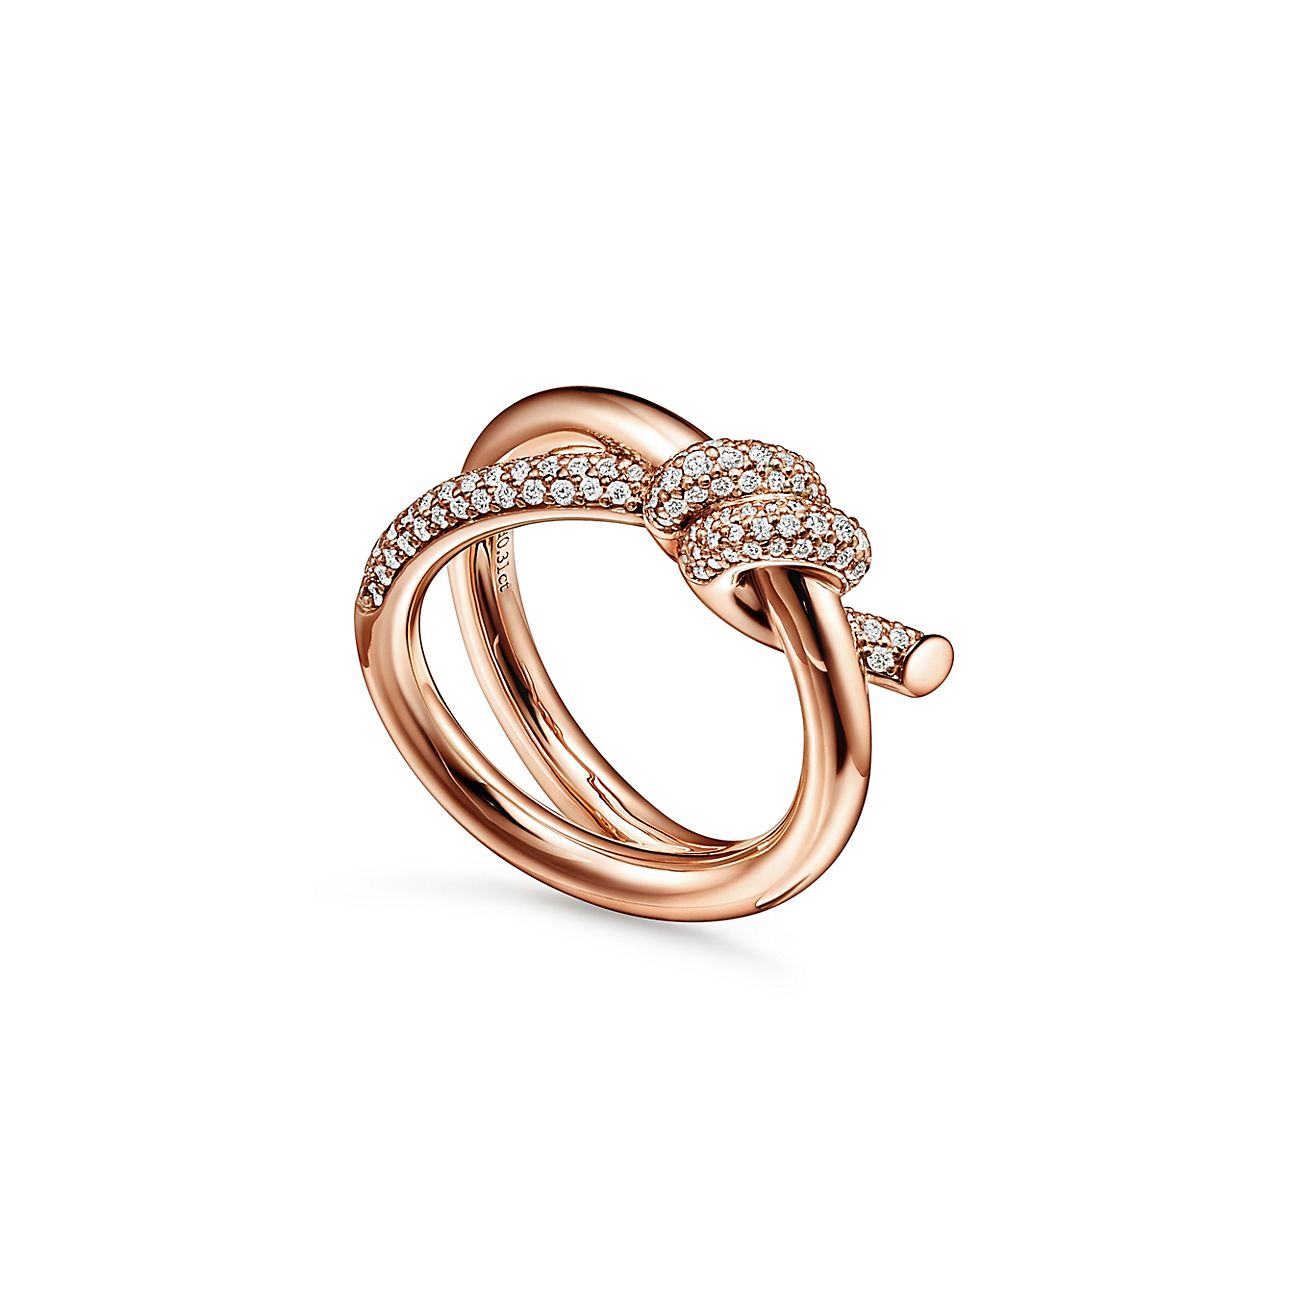 Tiffany Knot Double Row Ring in Rose Gold with Diamonds | Tiffany 